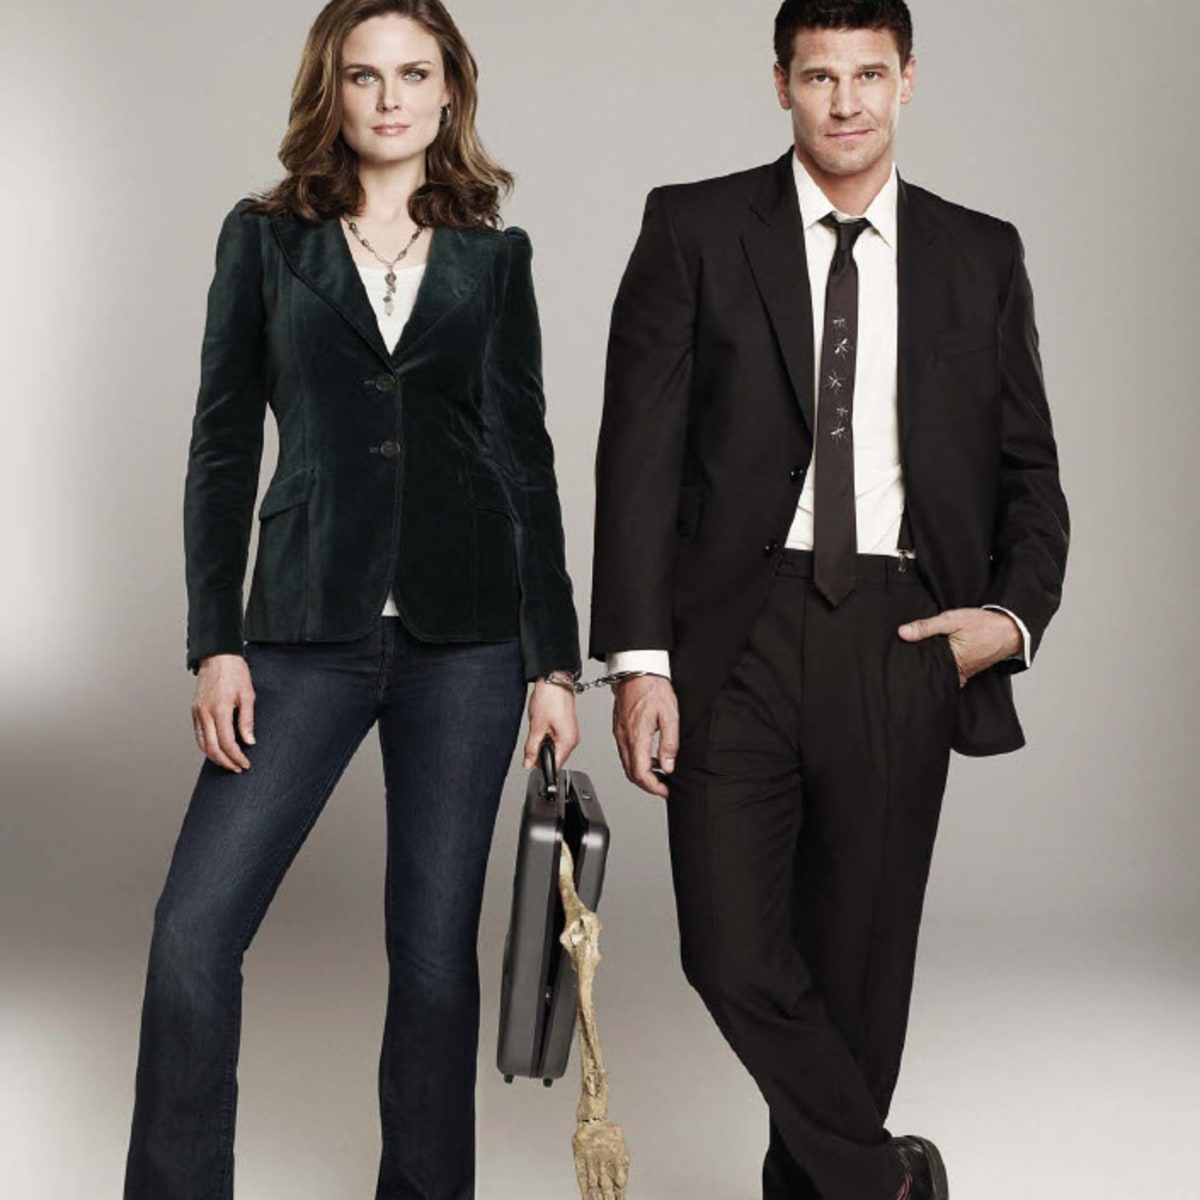 Bones booth and together what for first sleep the time episode do Bones and